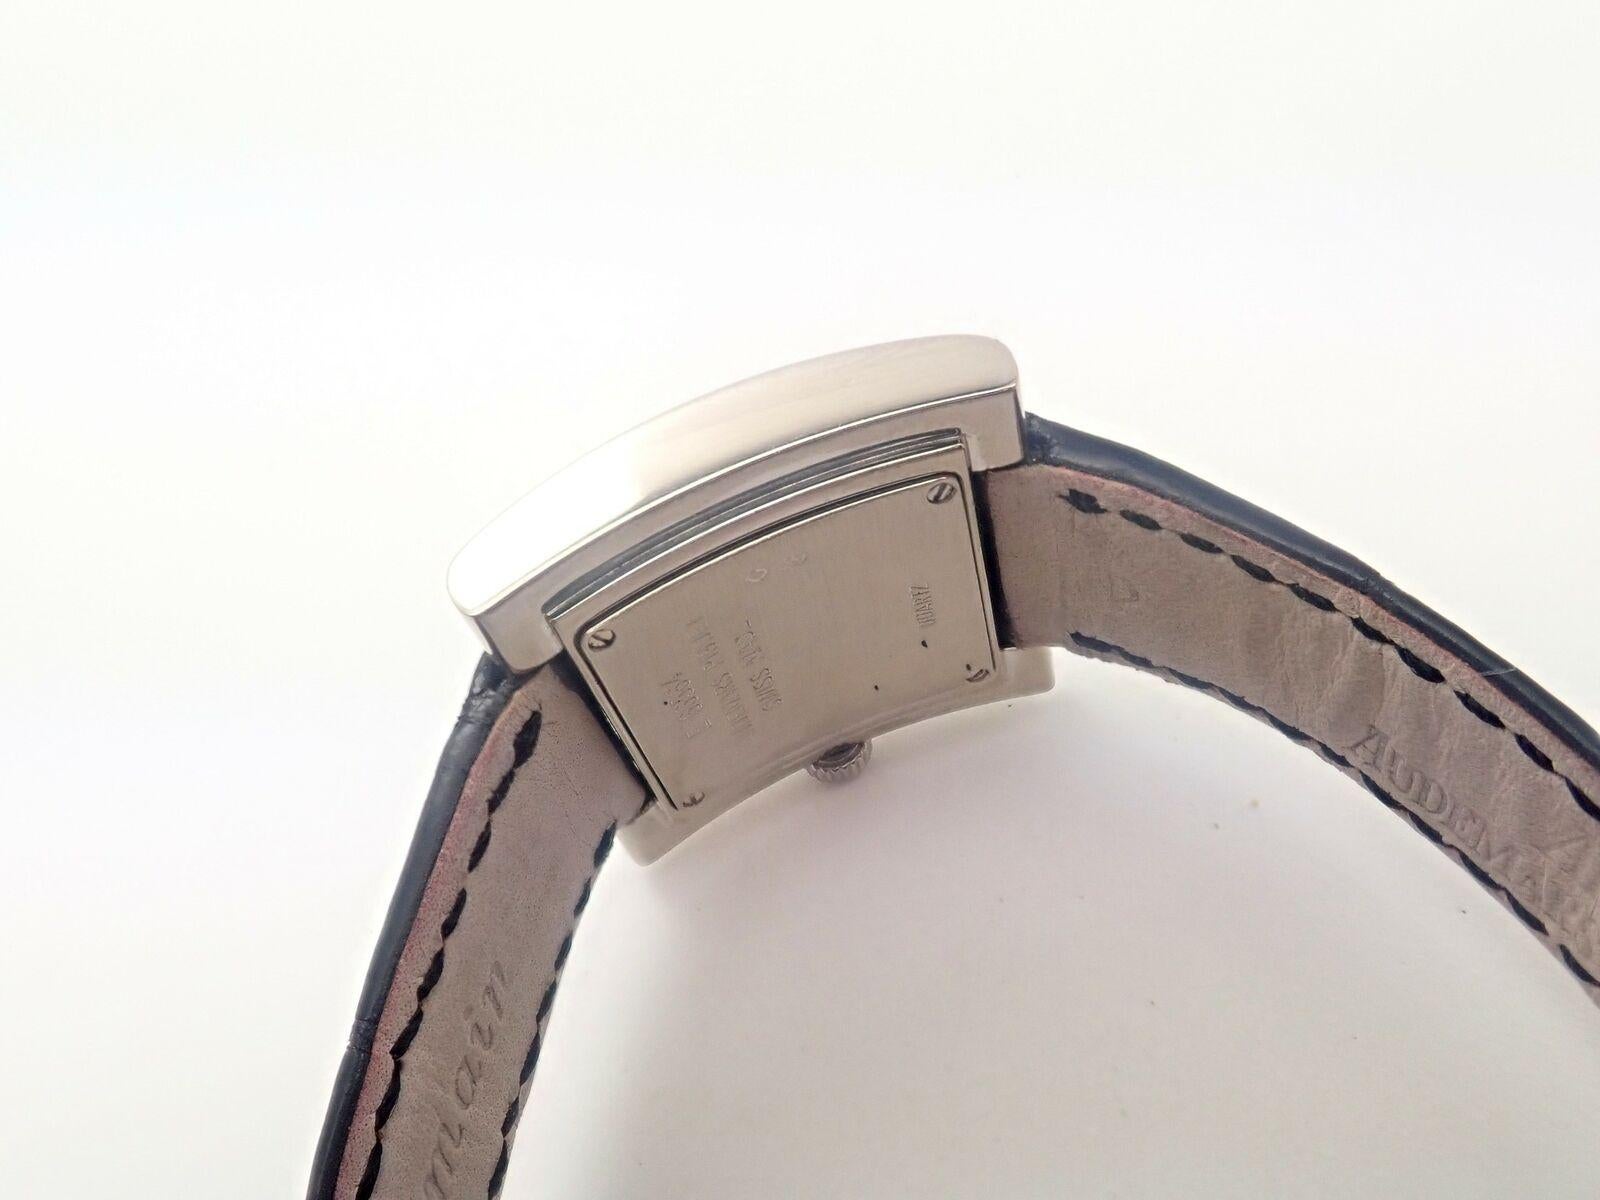 Audemars Piguet Diamond White Gold Ladies Watch In Excellent Condition For Sale In Holland, PA